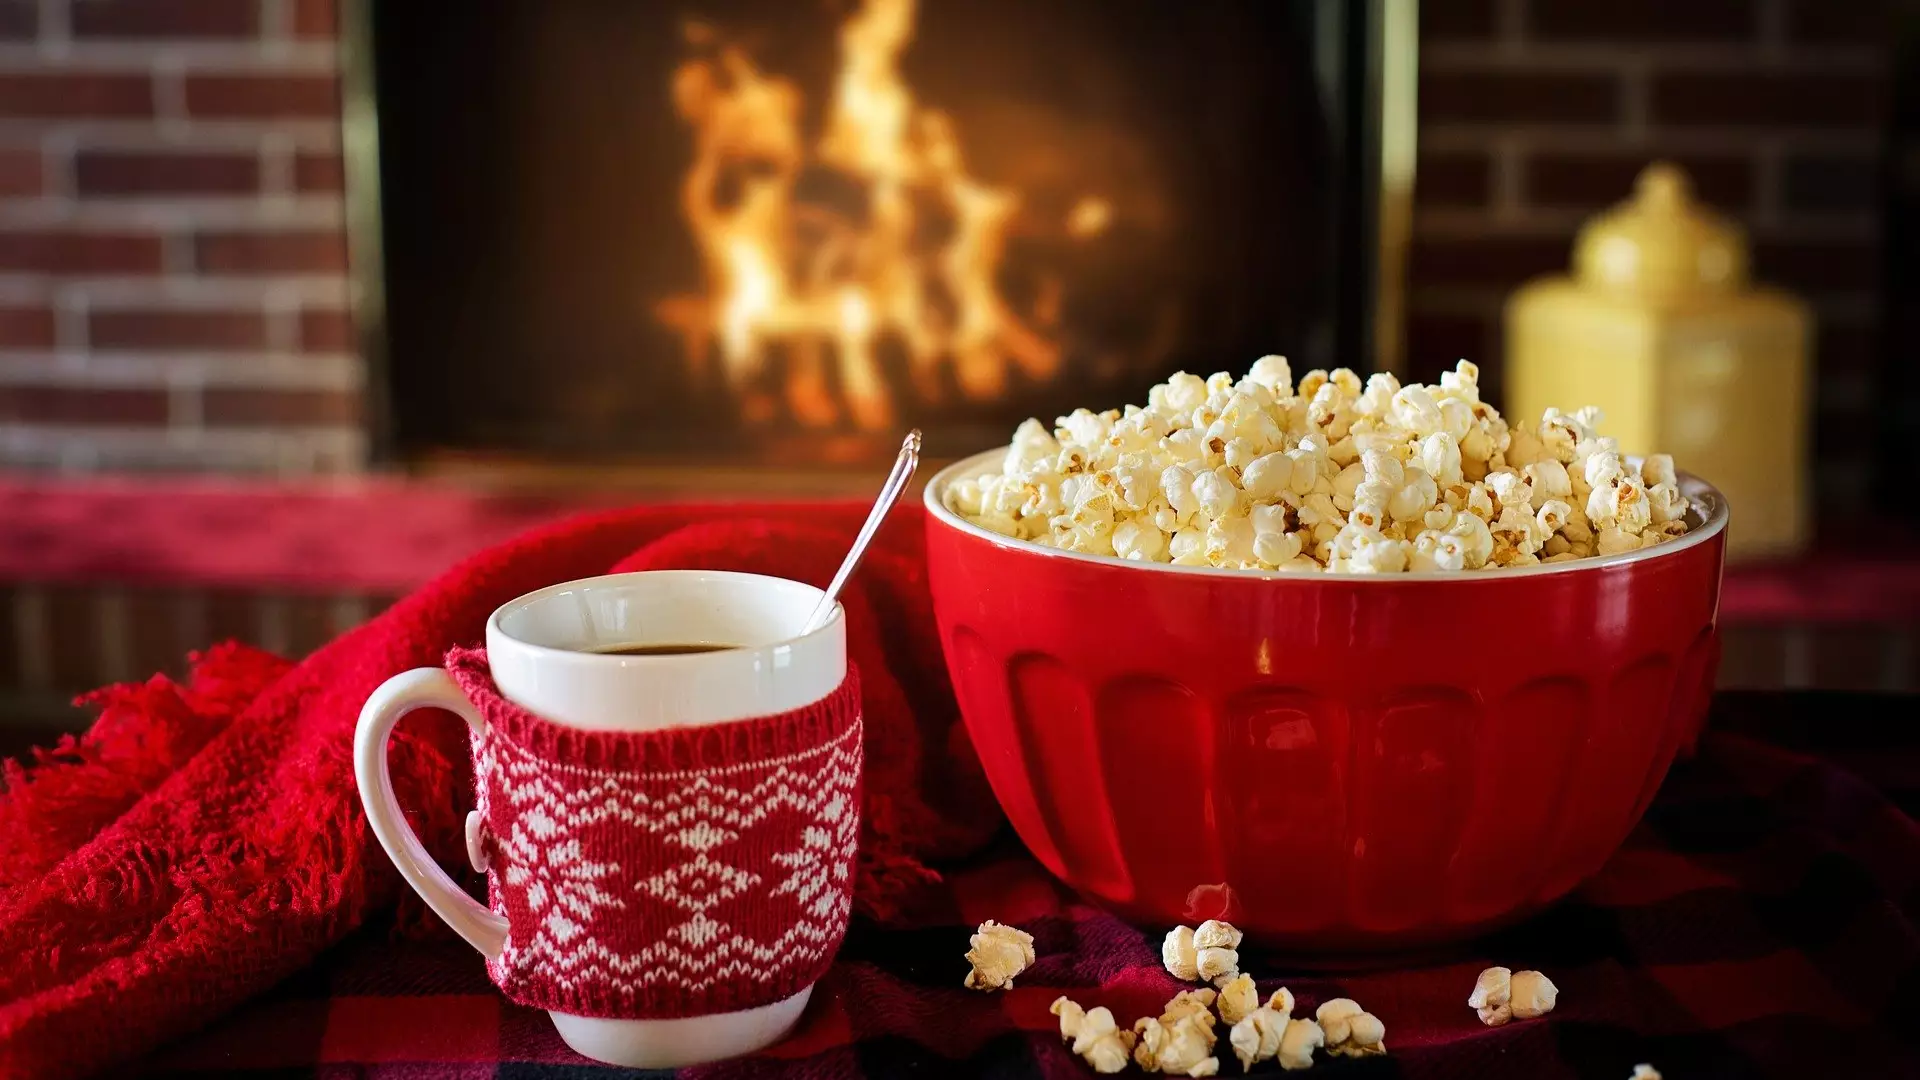 TV Channel That Plays Christmas Films 24/7 Has Launched